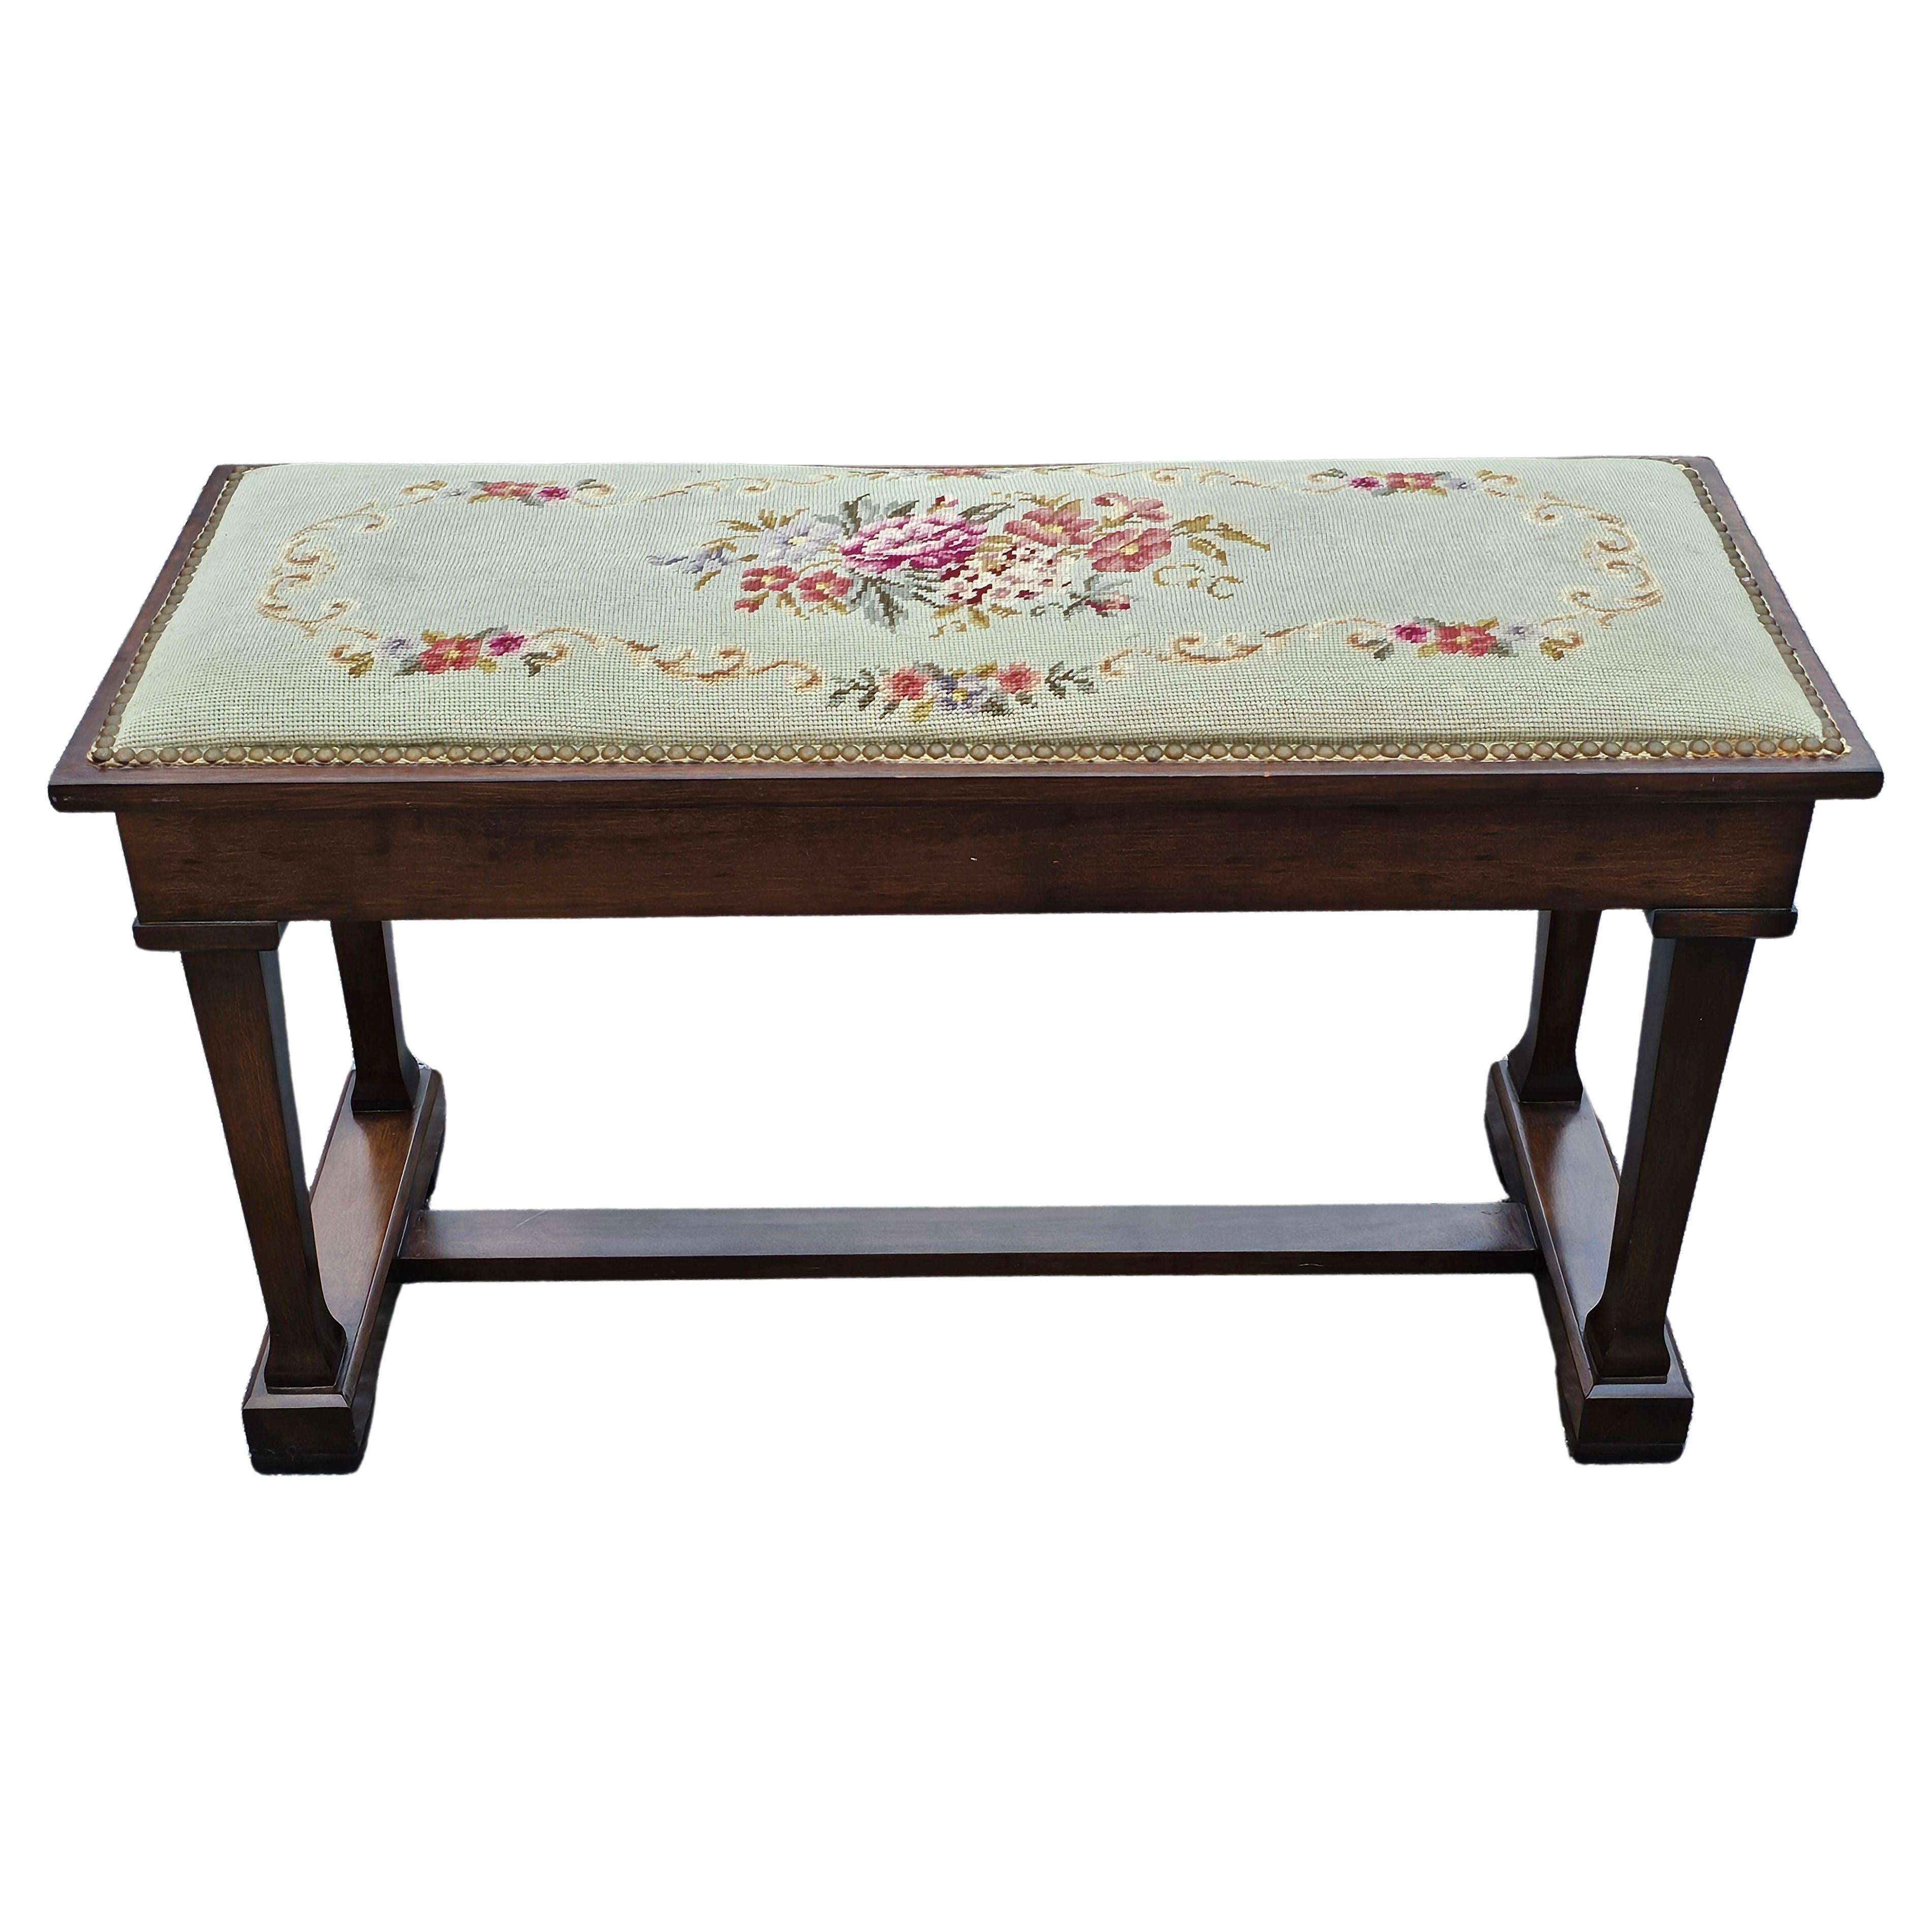 Edwardian Mid 20th Century Walnut NailHead Trims and Needlepoint Upholstered Trestle Bench For Sale